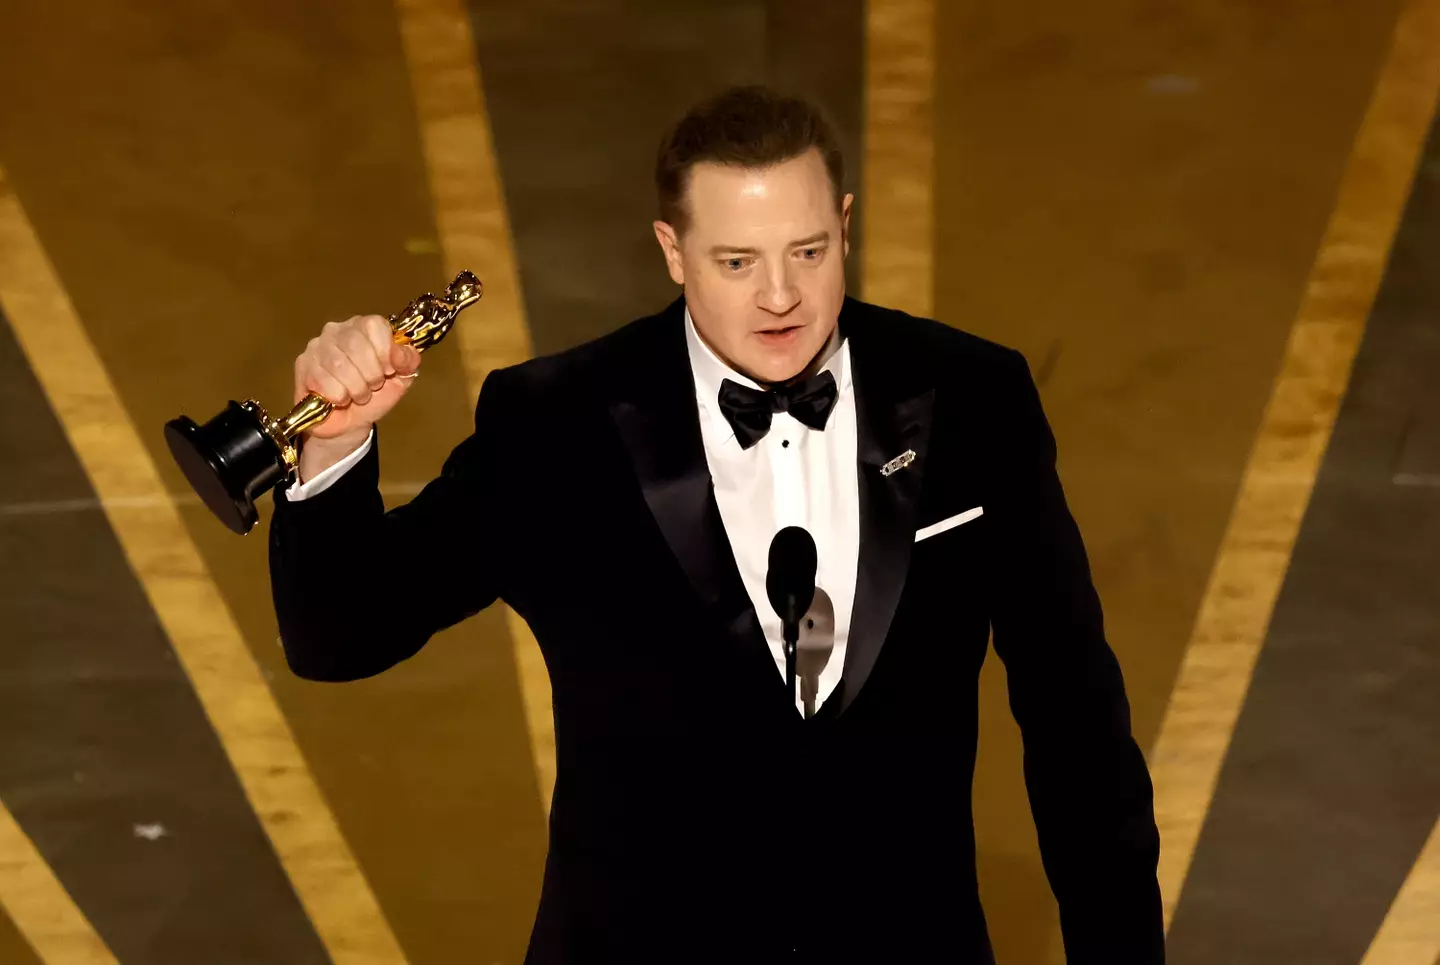 Brendan Fraser accepts the Academy Award for best actor in March 2023.